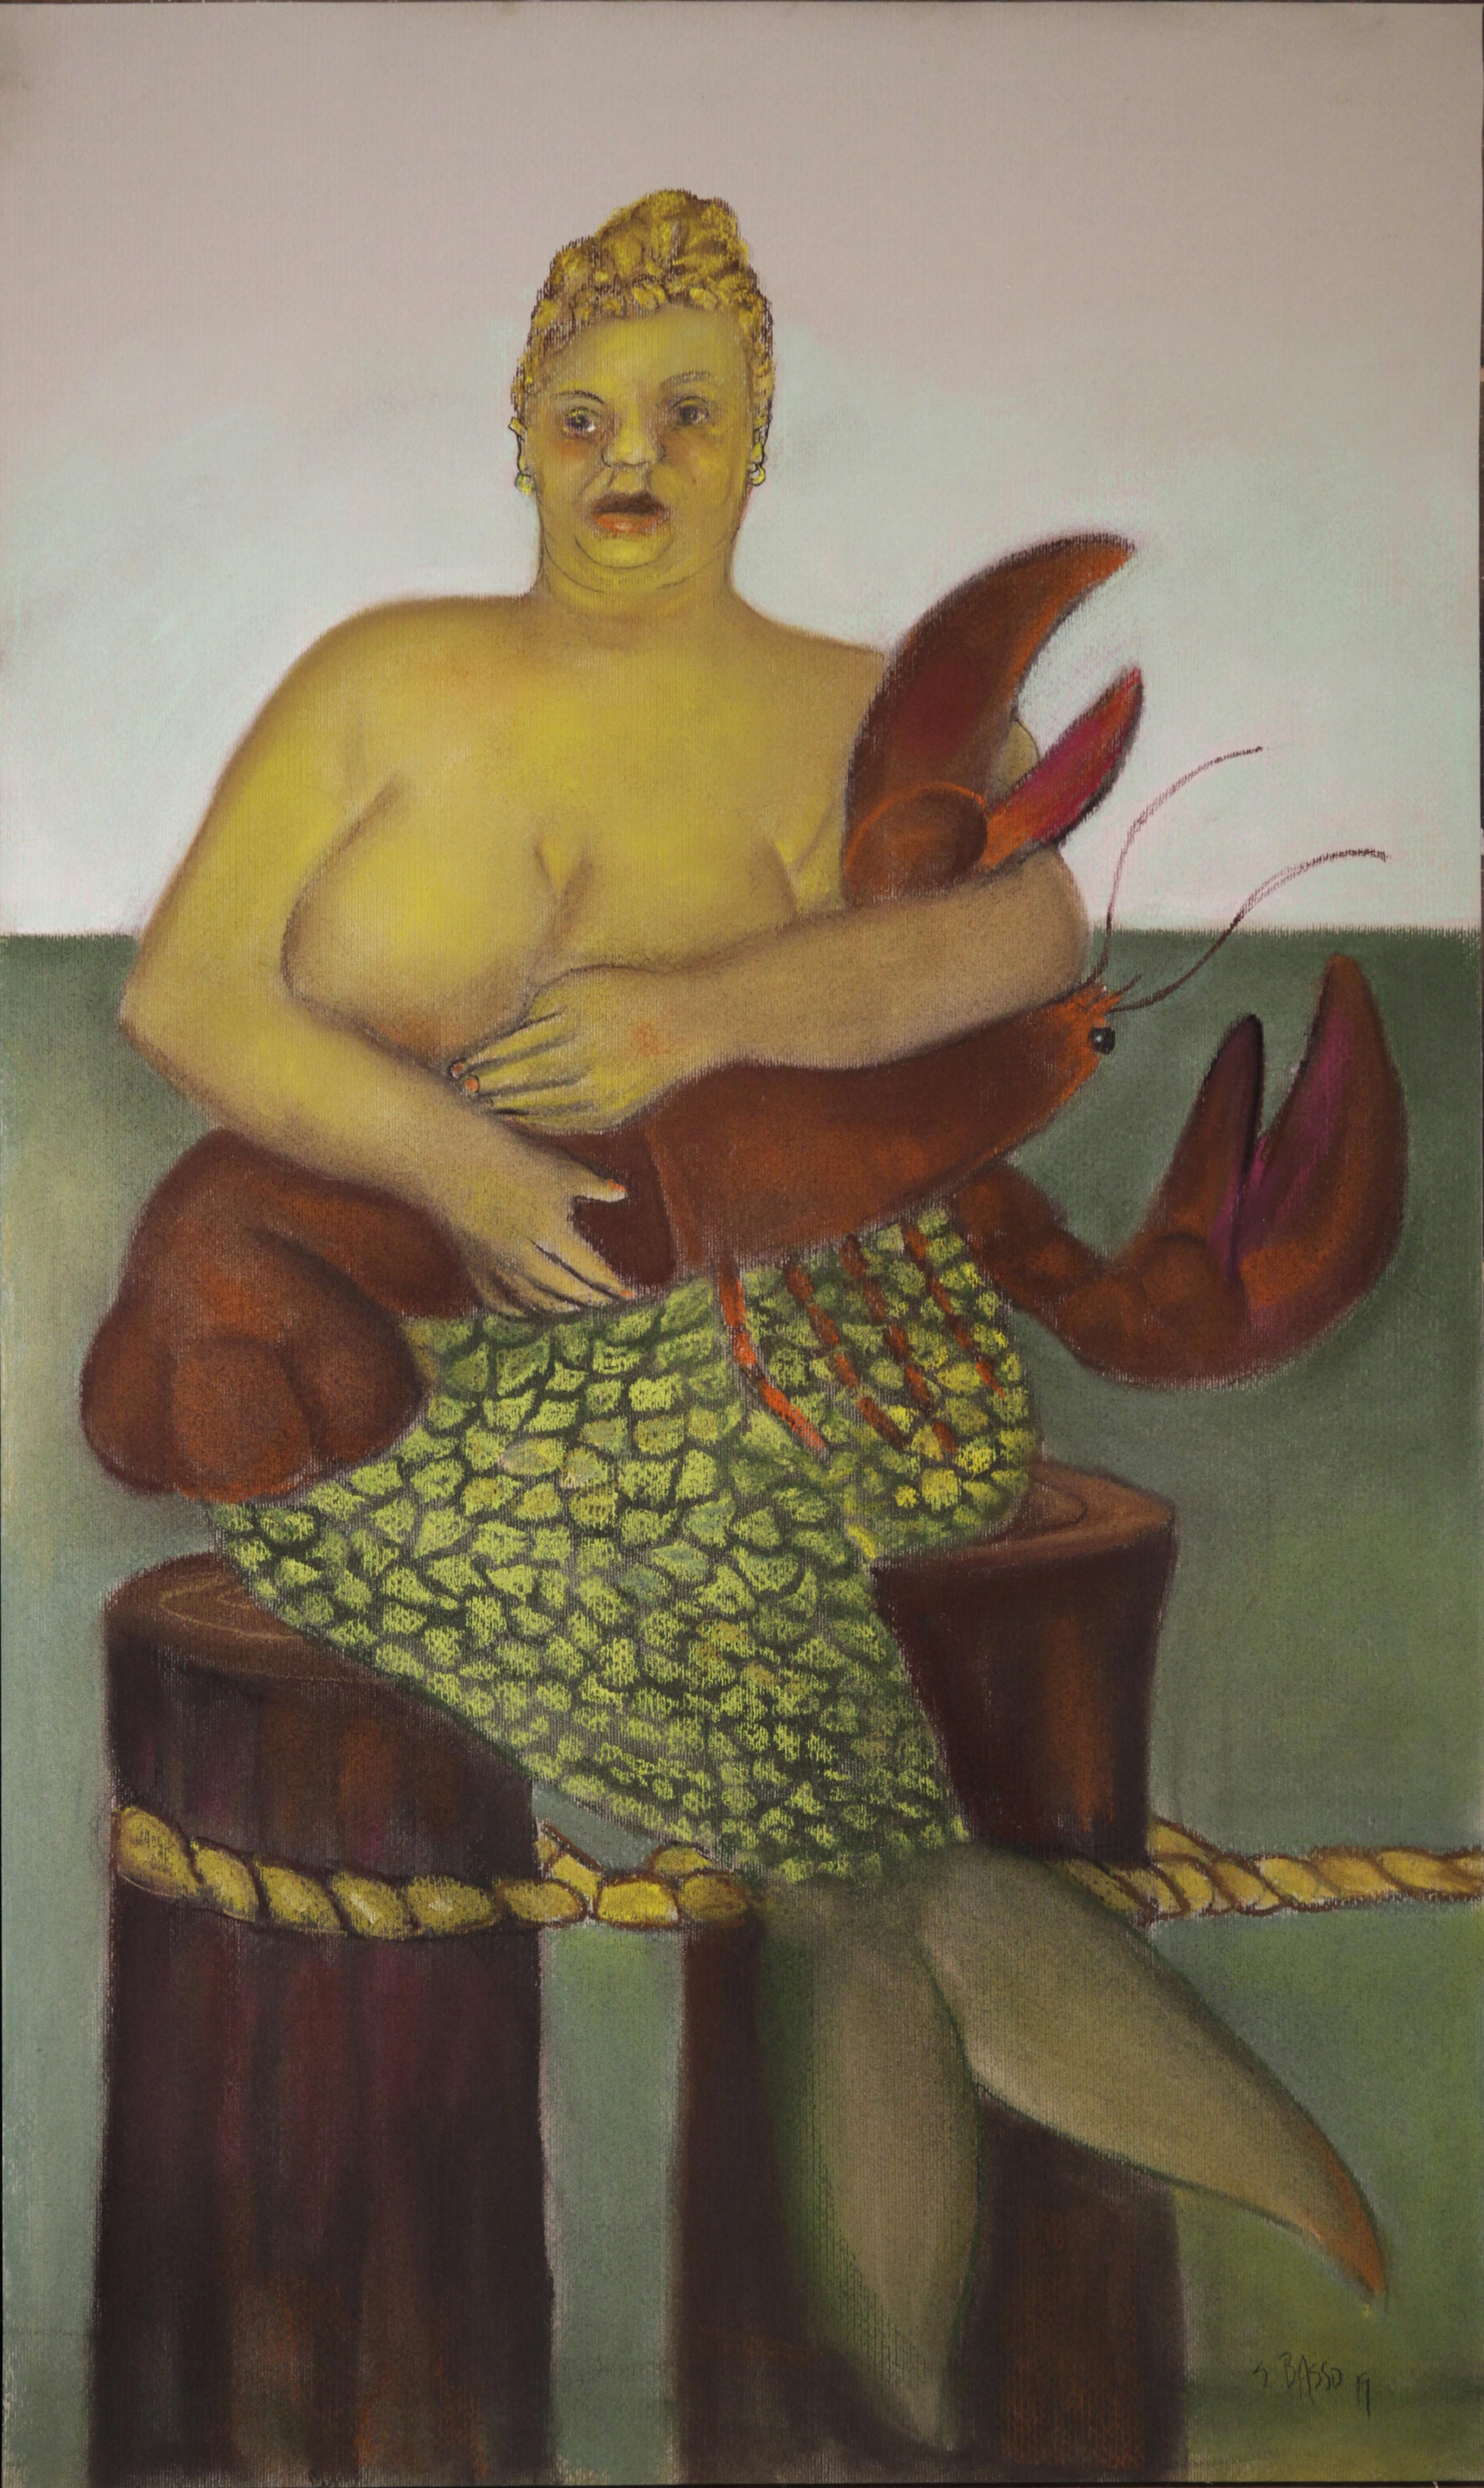 Stephen Basso Animal Art - Red Hook Mermaid, colorful pastel on toned archival paper, mythology w/ lobster